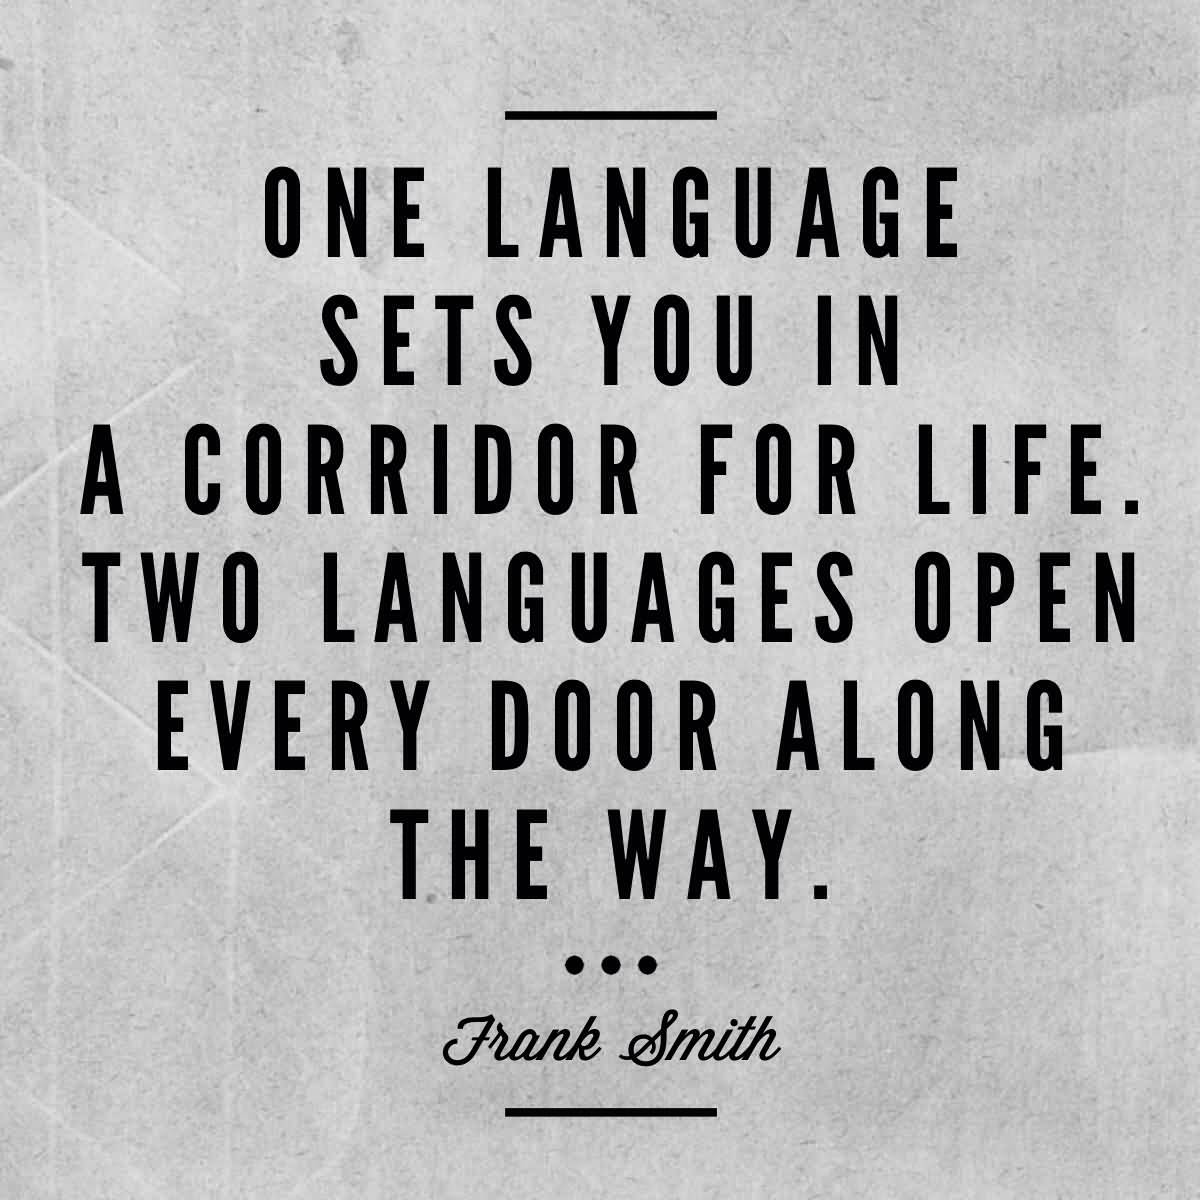 One language sets you in a corridor for life. Two languages open every door along the way. Frank Smith